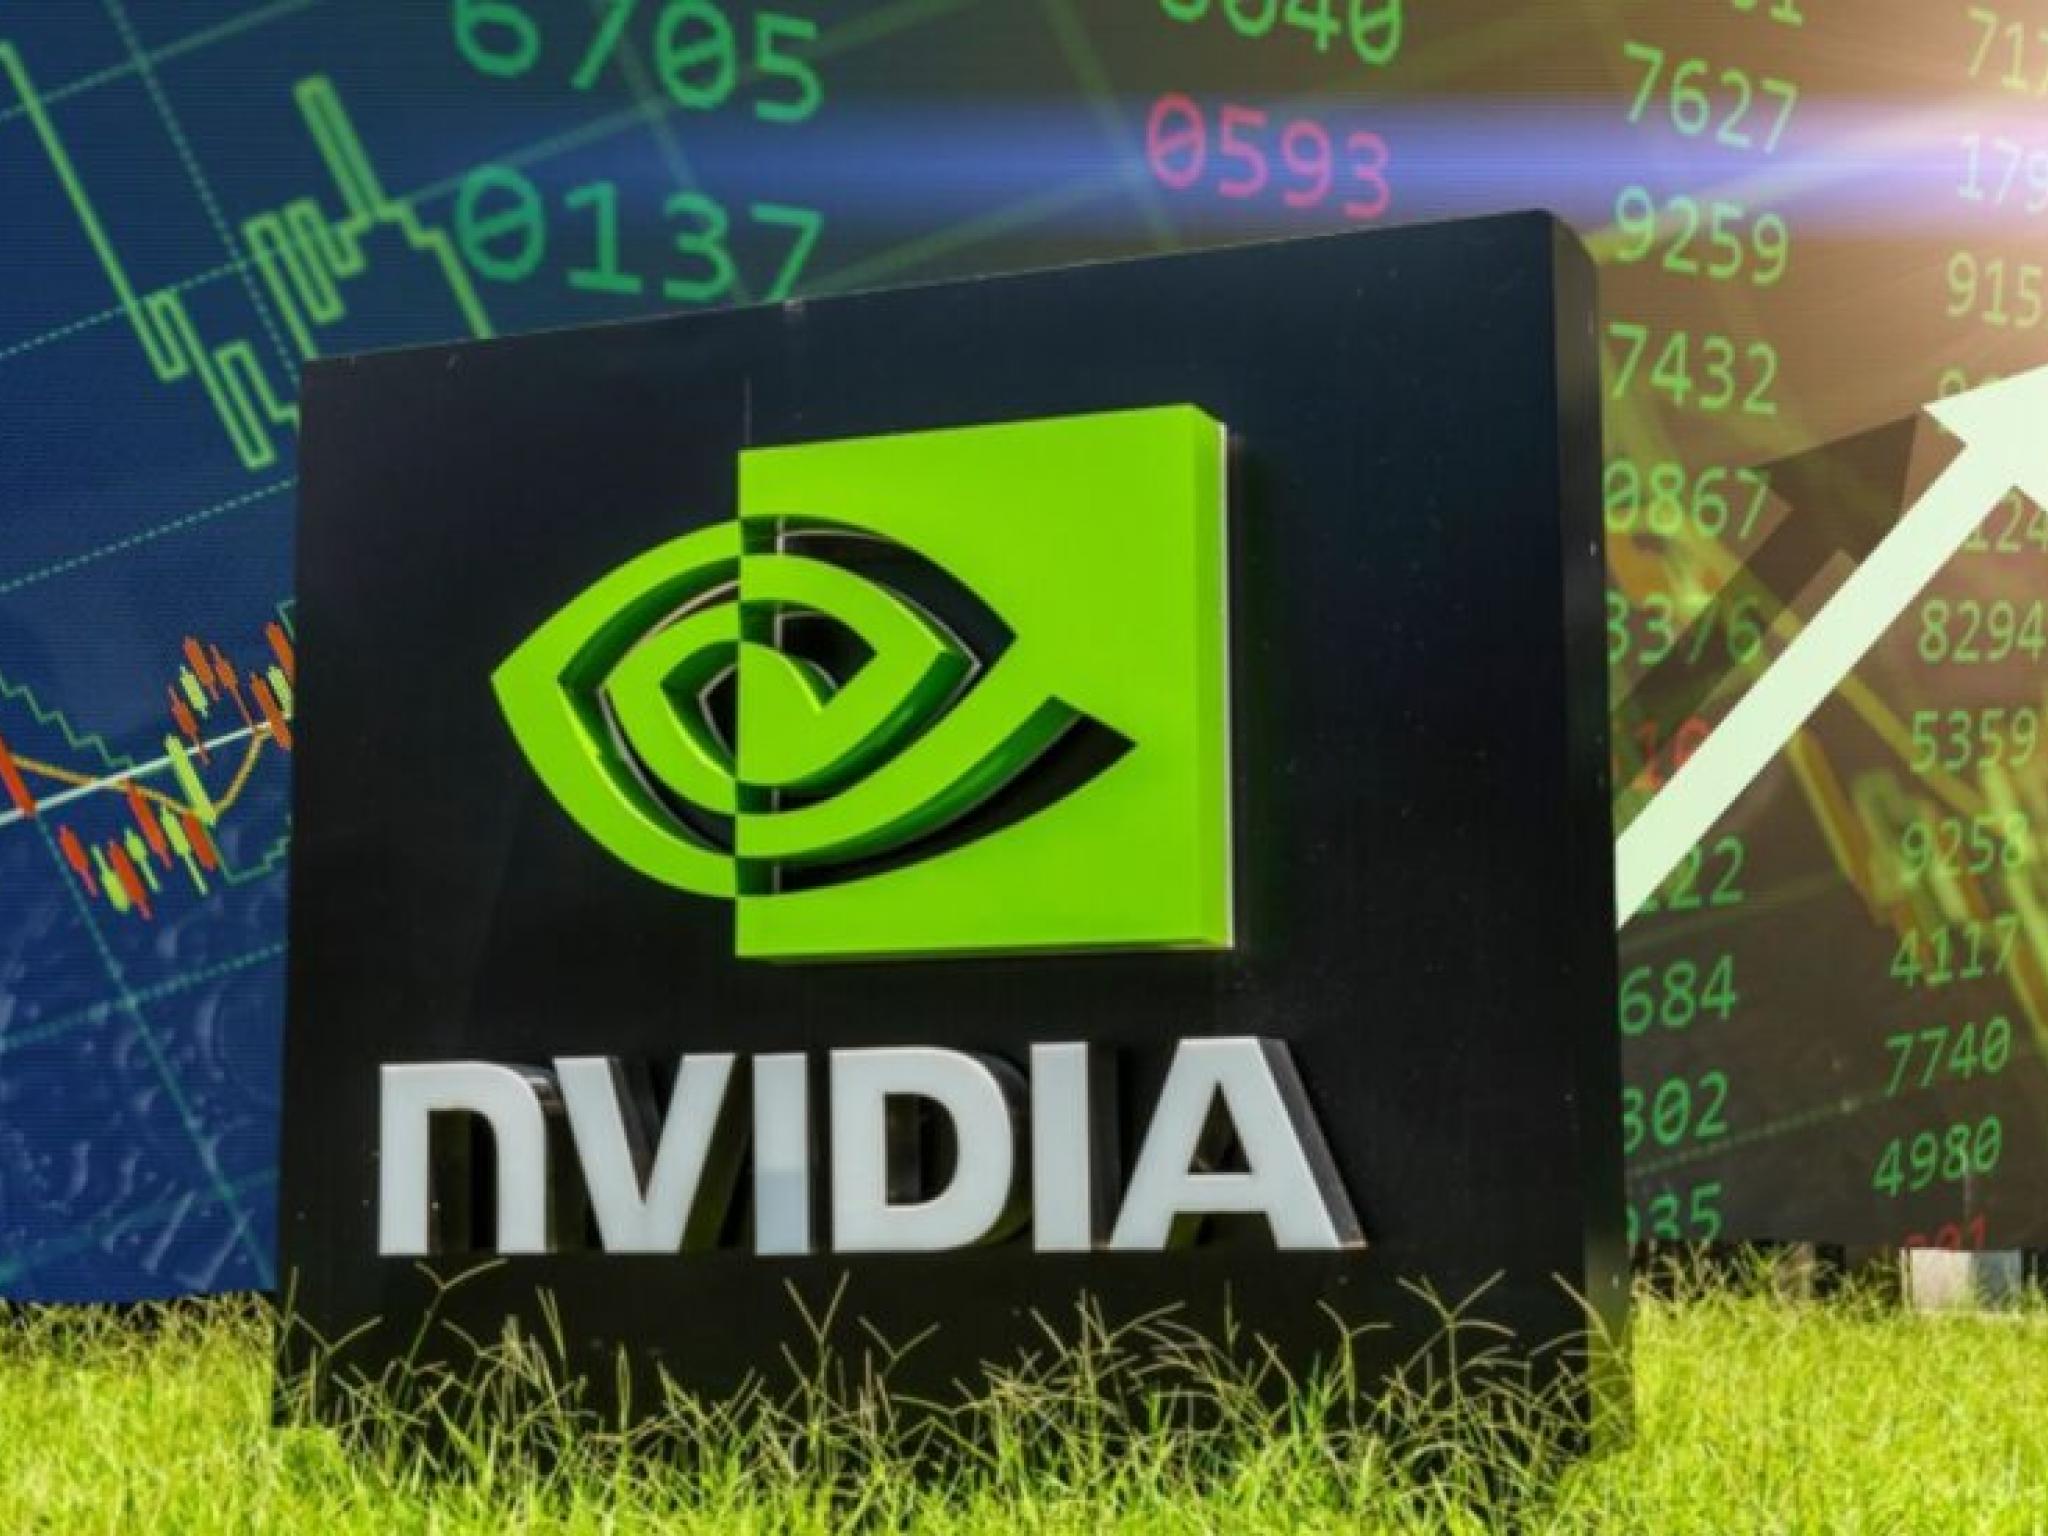  are-nvidia-eli-lilly-amds-high-equity-valuations-in-peril-from-higher-rates 